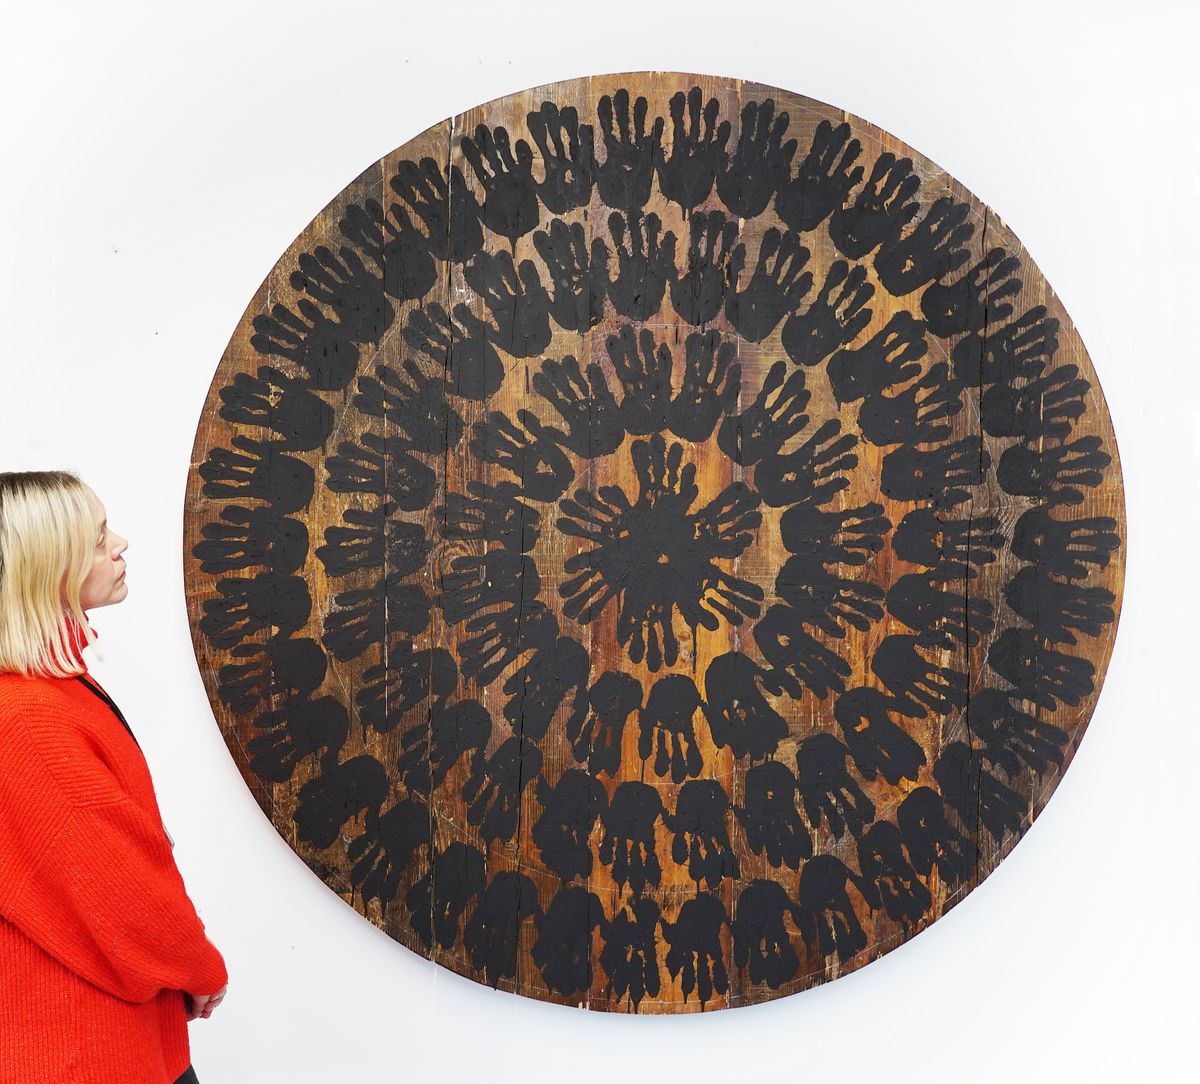 Richard Long's Amazon Burning and Dreaming (2023)

Courtesy of Migrate Art and the artist